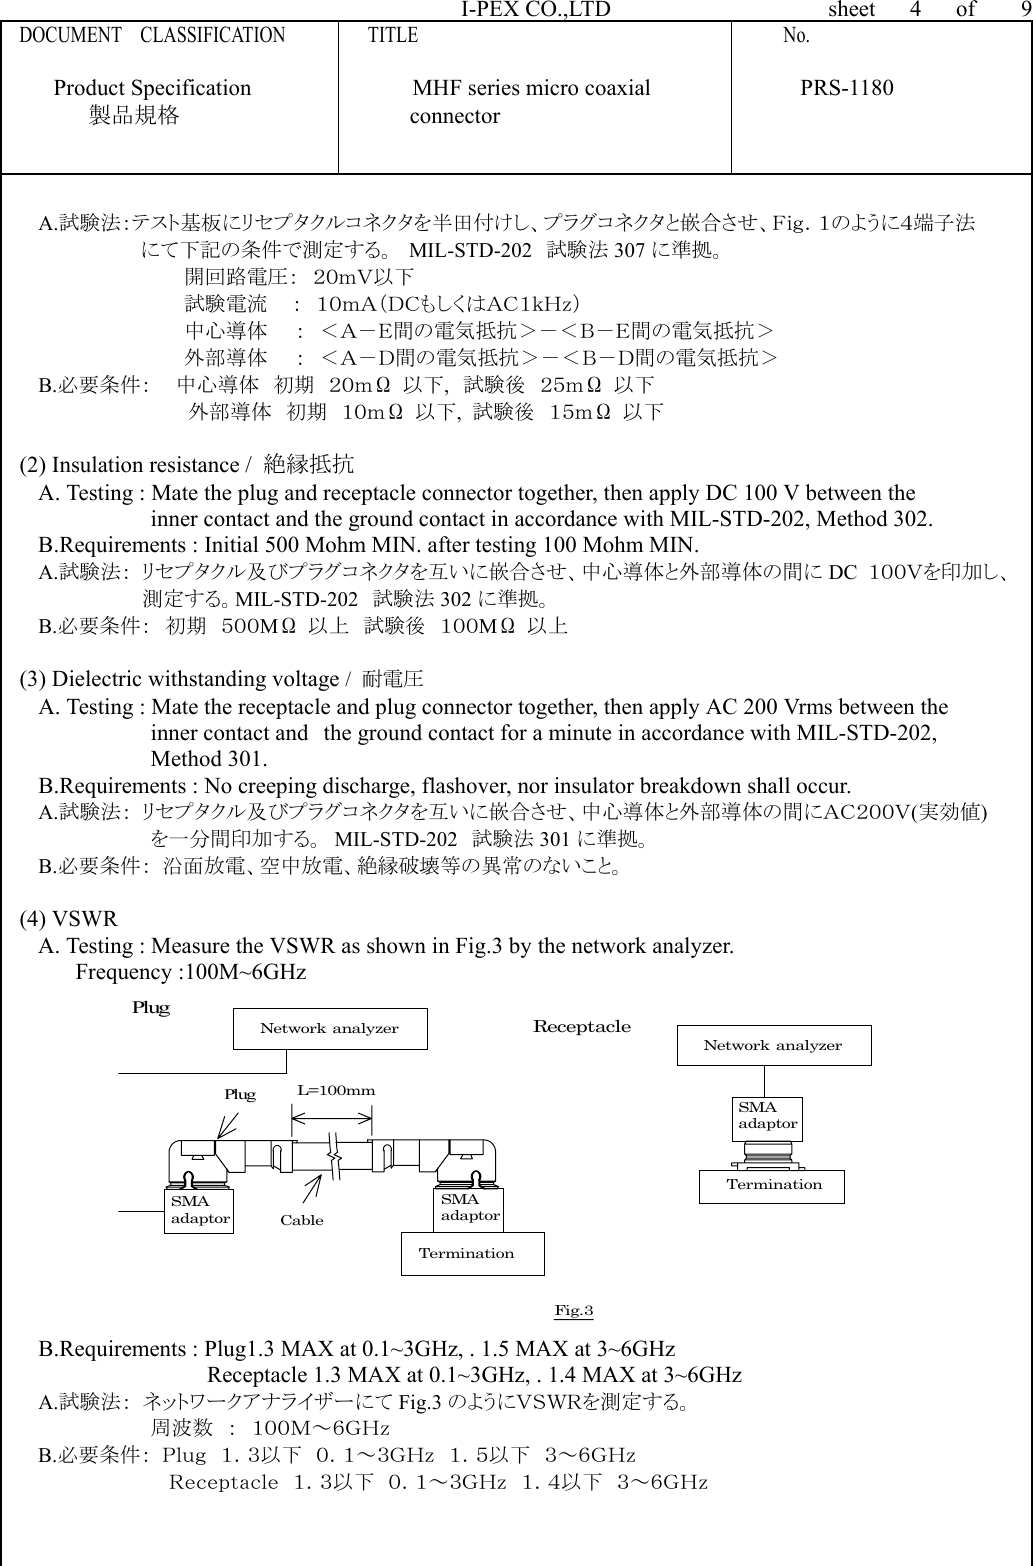 I-PEX CO.,LTD               sheet   4   of    9 DOCUMENT  CLASSIFICATION         TITLE                                        No.      Product Specification              MHF series micro coaxial             PRS-1180 製品規格                    connector    A.試験法：テスト基板にリセプタクルコネクタを半田付けし、プラグコネクタと嵌合させ、Ｆｉｇ．１のように４端子法 にて下記の条件で測定する。  MIL-STD-202  試験法 307 に準拠。 開回路電圧：  ２０ｍＶ以下 試験電流   ：  １０ｍＡ（ＤＣもしくはＡＣ１ｋＨｚ） 中心導体    ：  ＜Ａ－Ｅ間の電気抵抗＞－＜Ｂ－Ｅ間の電気抵抗＞ 外部導体    ：  ＜Ａ－Ｄ間の電気抵抗＞－＜Ｂ－Ｄ間の電気抵抗＞ B.必要条件：   中心導体  初期  ２０ｍΩ 以下,  試験後  ２５ｍΩ 以下 外部導体  初期  １０ｍΩ 以下,  試験後  １５ｍΩ 以下  (2) Insulation resistance /  絶縁抵抗  A. Testing : Mate the plug and receptacle connector together, then apply DC 100 V between the   inner contact and the ground contact in accordance with MIL-STD-202, Method 302. B.Requirements : Initial 500 Mohm MIN. after testing 100 Mohm MIN. A.試験法： リセプタクル及びプラグコネクタを互いに嵌合させ、中心導体と外部導体の間に DC  １００Ｖを印加し、 測定する。MIL-STD-202  試験法 302 に準拠。 B.必要条件：  初期  ５００MΩ  以上  試験後  １００MΩ 以上  (3) Dielectric withstanding voltage /  耐電圧  A. Testing : Mate the receptacle and plug connector together, then apply AC 200 Vrms between the   inner contact and the ground contact for a minute in accordance with MIL-STD-202,   Method 301.   B.Requirements : No creeping discharge, flashover, nor insulator breakdown shall occur. A.試験法： リセプタクル及びプラグコネクタを互いに嵌合させ、中心導体と外部導体の間にＡＣ２００Ｖ(実効値) を一分間印加する。 MIL-STD-202  試験法 301 に準拠。  B.必要条件： 沿面放電、空中放電、絶縁破壊等の異常のないこと。  (4) VSWR   A. Testing : Measure the VSWR as shown in Fig.3 by the network analyzer.   Frequency :100M~6GHz PlugCableFig.3L=100mmNetwork analyzerSMAadaptorPlugTerminationNetwork analyzerReceptacleTerminationSMAadaptorSMAadaptor B.Requirements : Plug1.3 MAX at 0.1~3GHz, . 1.5 MAX at 3~6GHz Receptacle 1.3 MAX at 0.1~3GHz, . 1.4 MAX at 3~6GHz   A.試験法： ネットワークアナライザーにて Fig.3 のようにＶＳＷＲを測定する。 周波数  ：  １００Ｍ～６ＧＨｚ B.必要条件： Ｐｌｕｇ  １．３以下  ０．１～３ＧＨｚ  １．５以下  ３～６ＧＨｚ Ｒｅｃｅｐｔａｃｌｅ  １．３以下  ０．１～３ＧＨｚ  １．４以下  ３～６ＧＨｚ    Form.Rev.0 